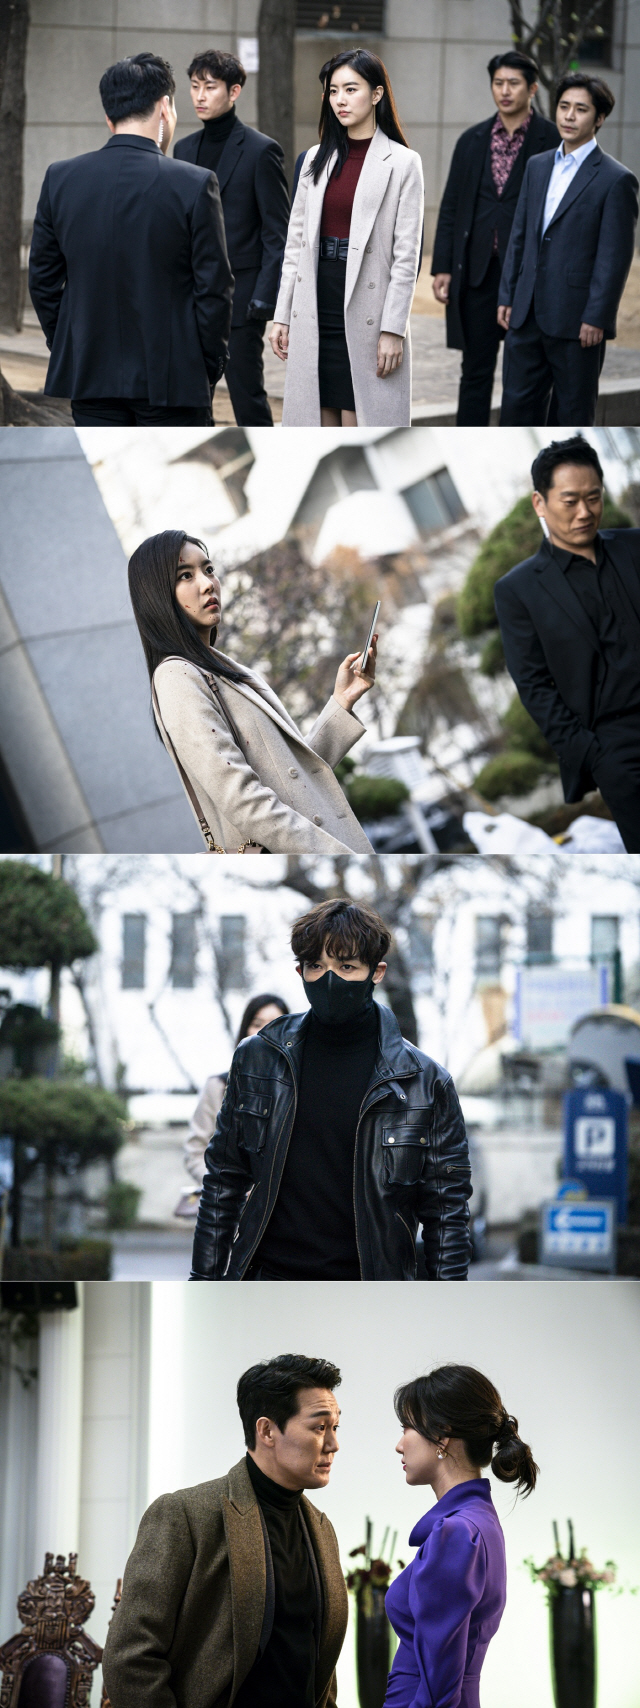 OCN TOIL Original Lugal (directed by Kang Cheol-woo, Dohyeon, Planning Studio Dragon, and Produced by Liyen Entertainment) captures Choi Ye-won and River example (Choi Jin-hyuk) in an unexpected situation on the 3rd, which stimulates curiosity.The blood-colored war between Park Sung-woong and Choi Ye-won, who killed Bose Corporation and engulfed Argos, is also in full swing and heightens tension.Detective River example who lost his eyes and was driven to murder his wife.The director of Rugal, Choi Geun-cheol (Kim Min-sang), has been in contact with him, and the River example has been transplanted with artificial eyes and revived as a Rugal team member.Han Tae-woong (Jo Dong-hyuk), Song Min-na (Jung Hye-in), and Lee Kwang-chul (Park Sun-ho), who were angry at Argos and reborn as human weapons, became a team.After training, he finally set out on his first mission.At the end of the operation, the image of the River example, which ran across Mindalho (played by Yoo Sang-hoon), who killed his wife, was taken on the black box, and Hwang Deuk-gu learned that the River example was alive.Meanwhile, Hwang killed Gu Longdeok (Park Jung-hak) chairman with Choi Ye-won, who was supposed to be Bose Corporations wife, and took the power of Argos.River example, Hwang Deuk-gu, and the confrontation between good and evil in the unpredictable development were predicted in earnest.In the meantime, the photo shows Choi Ye-won in crisis and River example in front of him, raising tension.There will be a lot of threats for Choi Ye-won, who naturally became the successor of Argos due to the absence of Gu Long Duck.As he headed somewhere with his men, he was blocked by the members of the organization. The surprised Choi Ye-won and the River example, which appeared to protect him, stimulate curiosity.How will the strange relationship between Rugal and Argos, facing each other in unexpected circumstances, be solved? In another photo, Hwang Deuk-gu and Choi Ye-won, who look at each other as if they are eating each other, were also captured.Two people tied up in a secret about the death of Gu Longduk.At the time of Lugals revenge, I wonder what kind of development will be the relationship between Hwang Deuk-gu and Choi Ye-won, who started the war inside Argos.At the end of the last broadcast, a man who asked me to meet him, saying he was the real killer of River examples wife.He was shocked to self-destruct, leaving a message to River example, I did what he told me to do.The trailer, which was released earlier, also depicted River example, who began to pursue Argos, saying, If you find out who he is, all these questions will be solved.Hwang Deuk-gu, who started collecting experimental materials for human remodeling, Rugal team who started to chase him, and Choi Ye-won, who are entangled in the meantime, expect a hot confrontation between Rugal and Argos.The relationship between the two and Choi Ye-won will bring about unpredictable developments, said the Lugal production team, how the artificial eye hero River example and Billon Hwang Deuk-gu will chase each other, and expect a close battle and intense confrontation.It airs at 10:50 p.m. on the 4th.